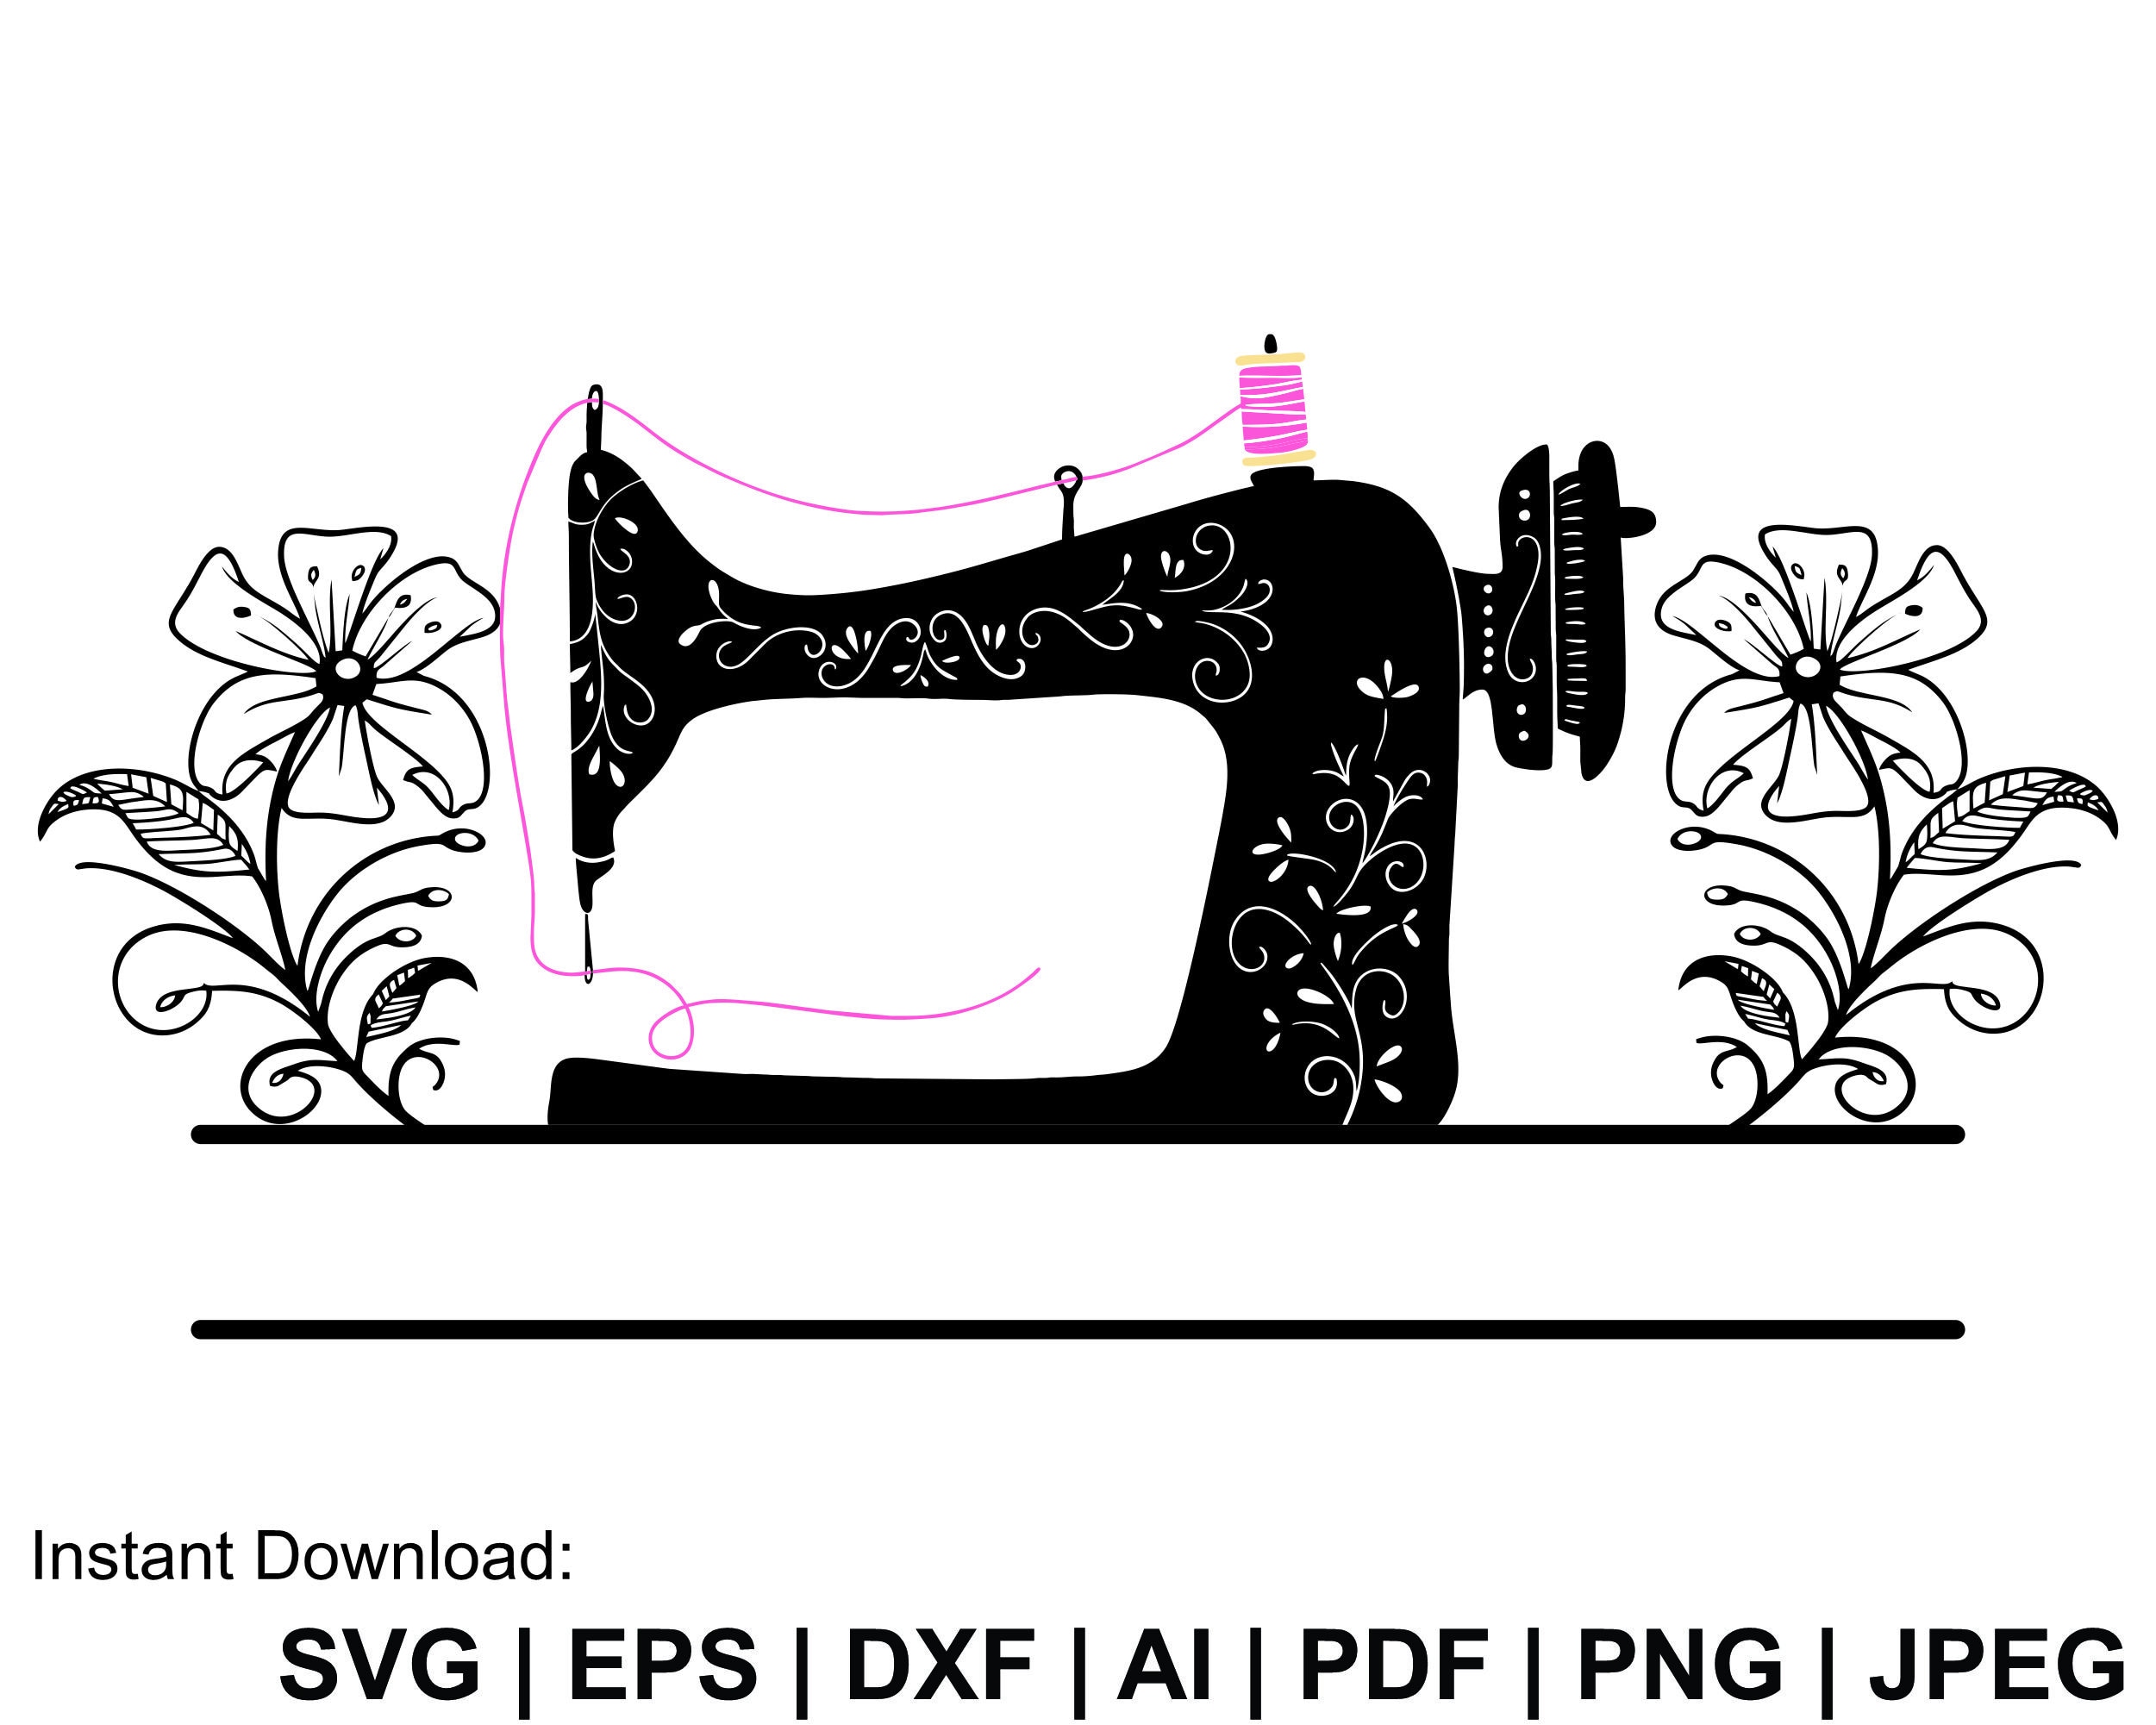 Sewing Machine Floral Cut File SVG, DXF, PDF, Png, Cricut, Silhouette  Cameo, Vinyl Cutter, Vinyl Decal, Digital Download, Quilting, Sew 